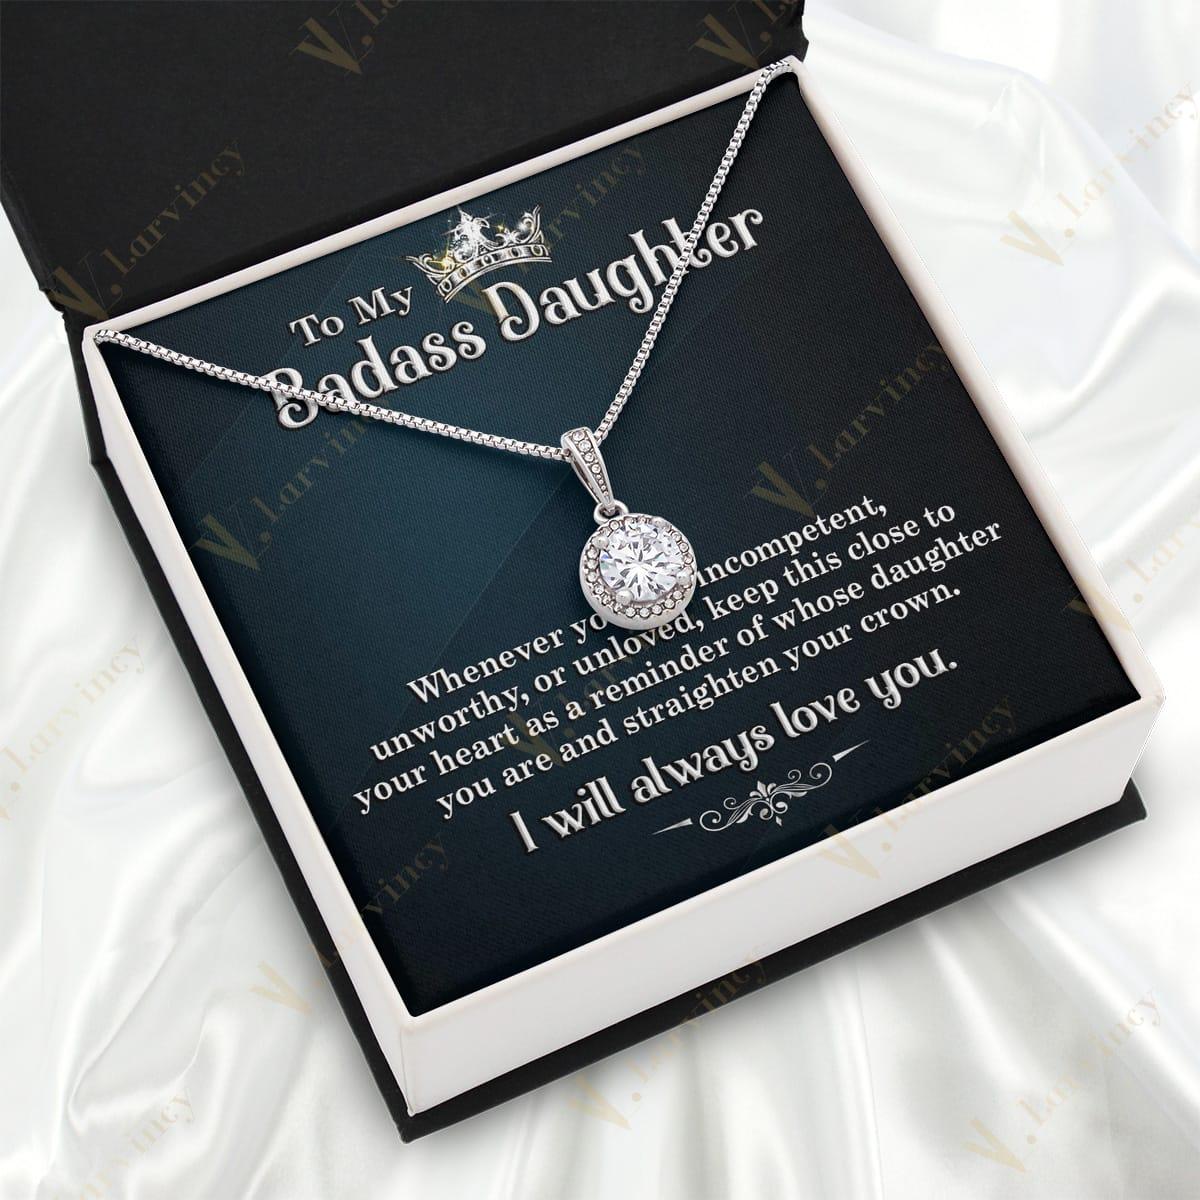 To My Badass Daughter Necklace From Mom, Jewelry For A Daughter From Mom With Gift Box And Personalized Message Card, Fell Incompetent - Larvincy